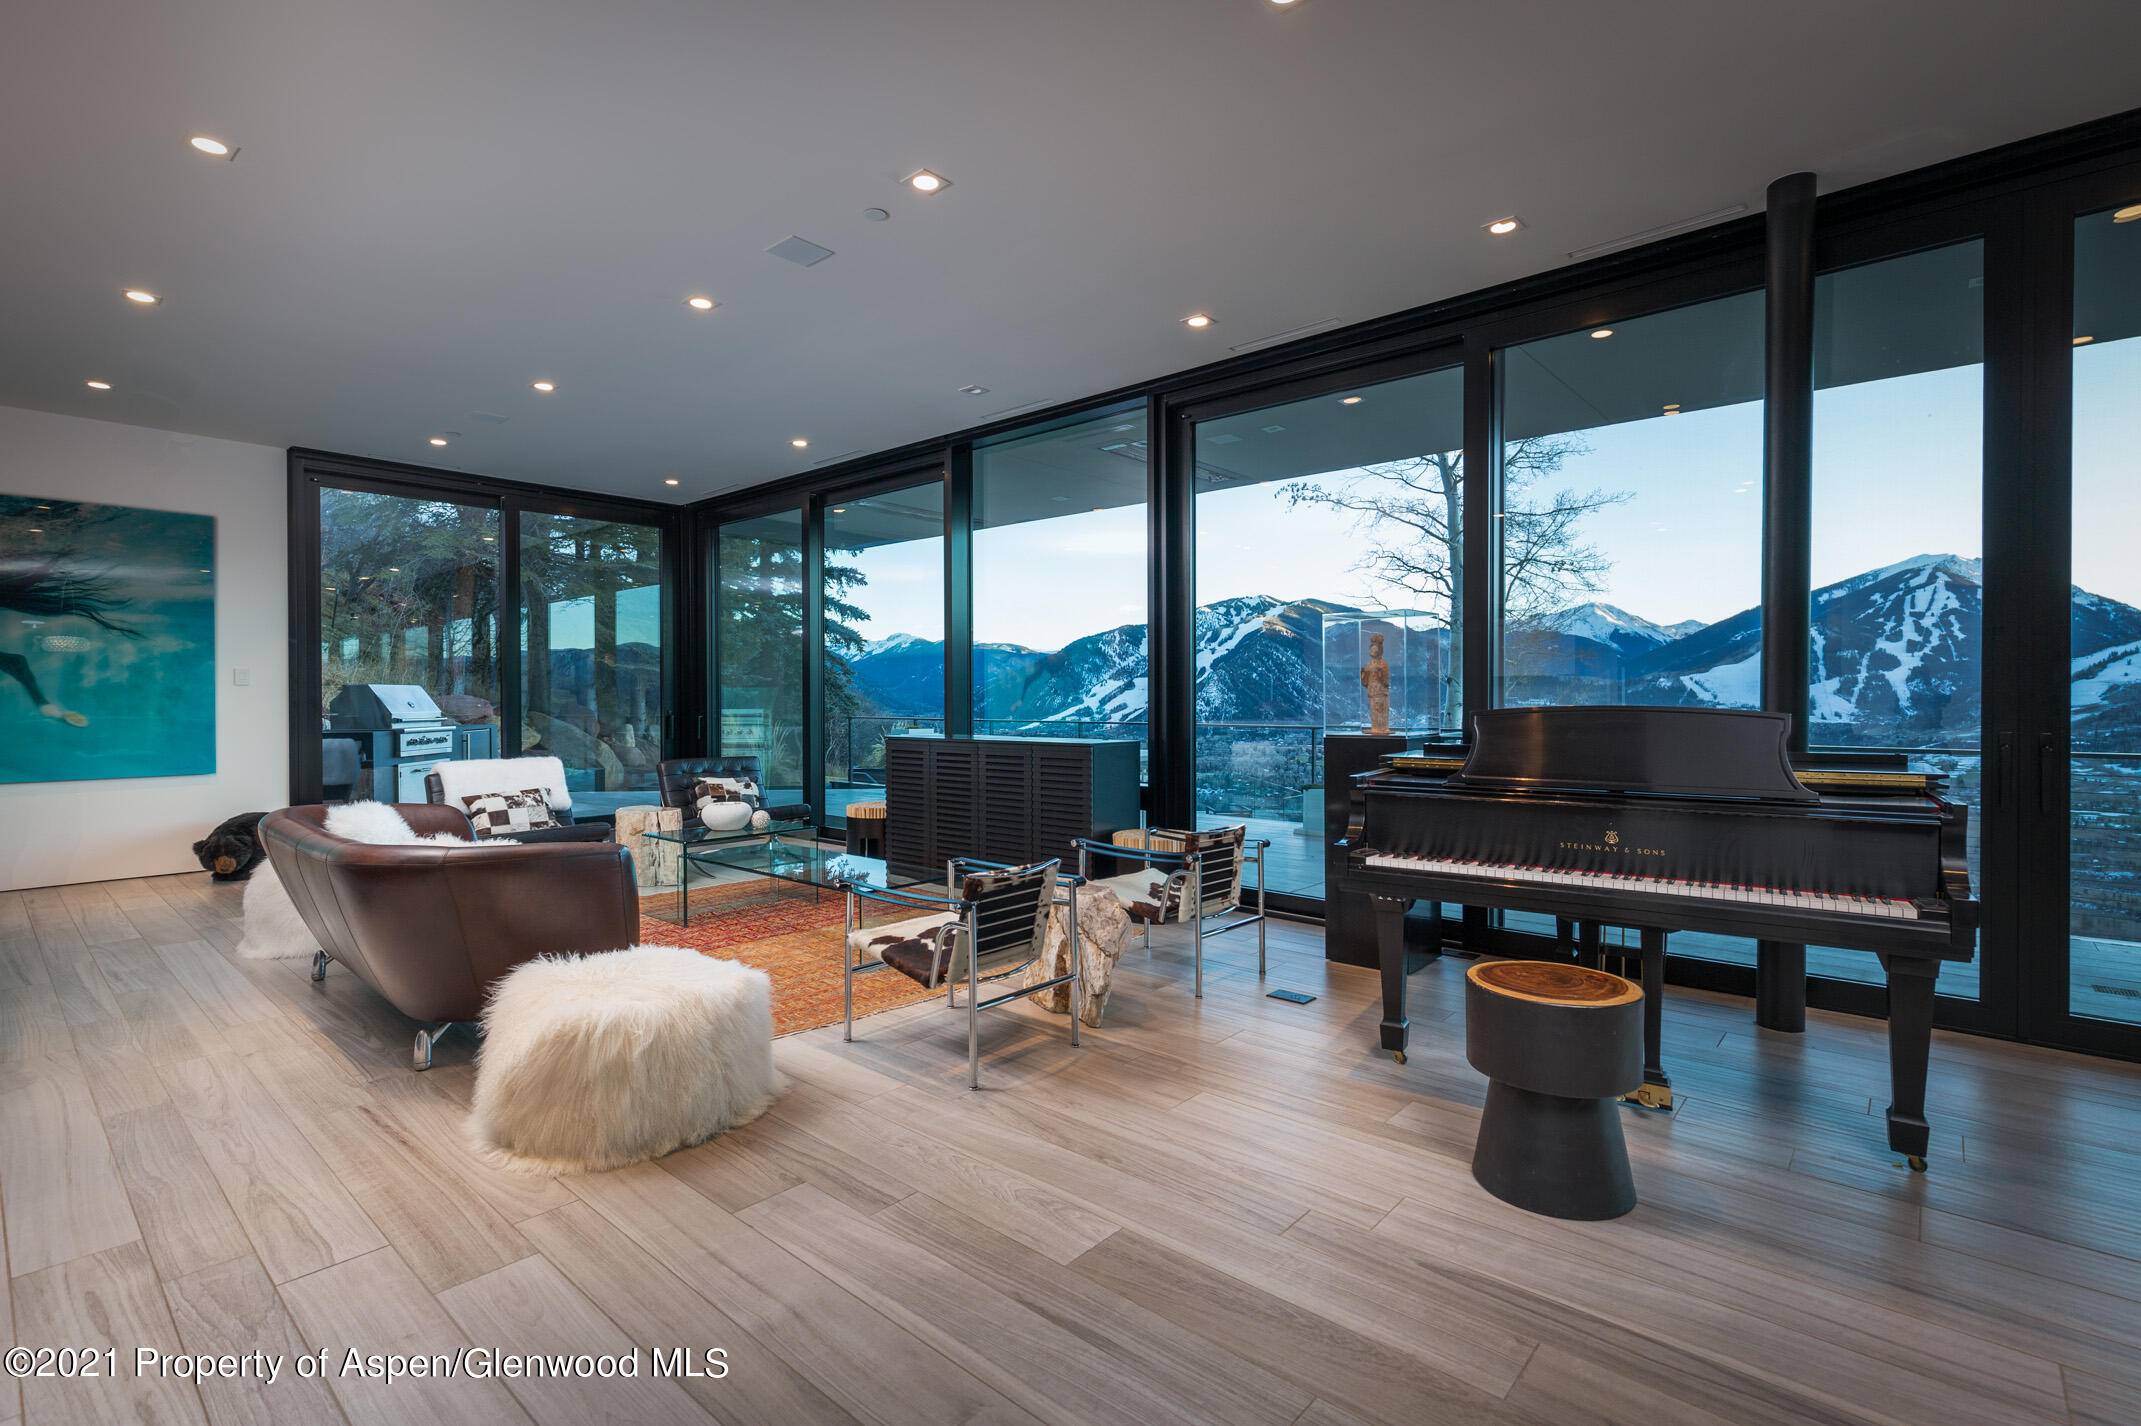 This spectacular, ultra modern, mountain top estate was completed in 2018 and has unobstructed, panoramic views of all four ski areas and the Continental Divide.